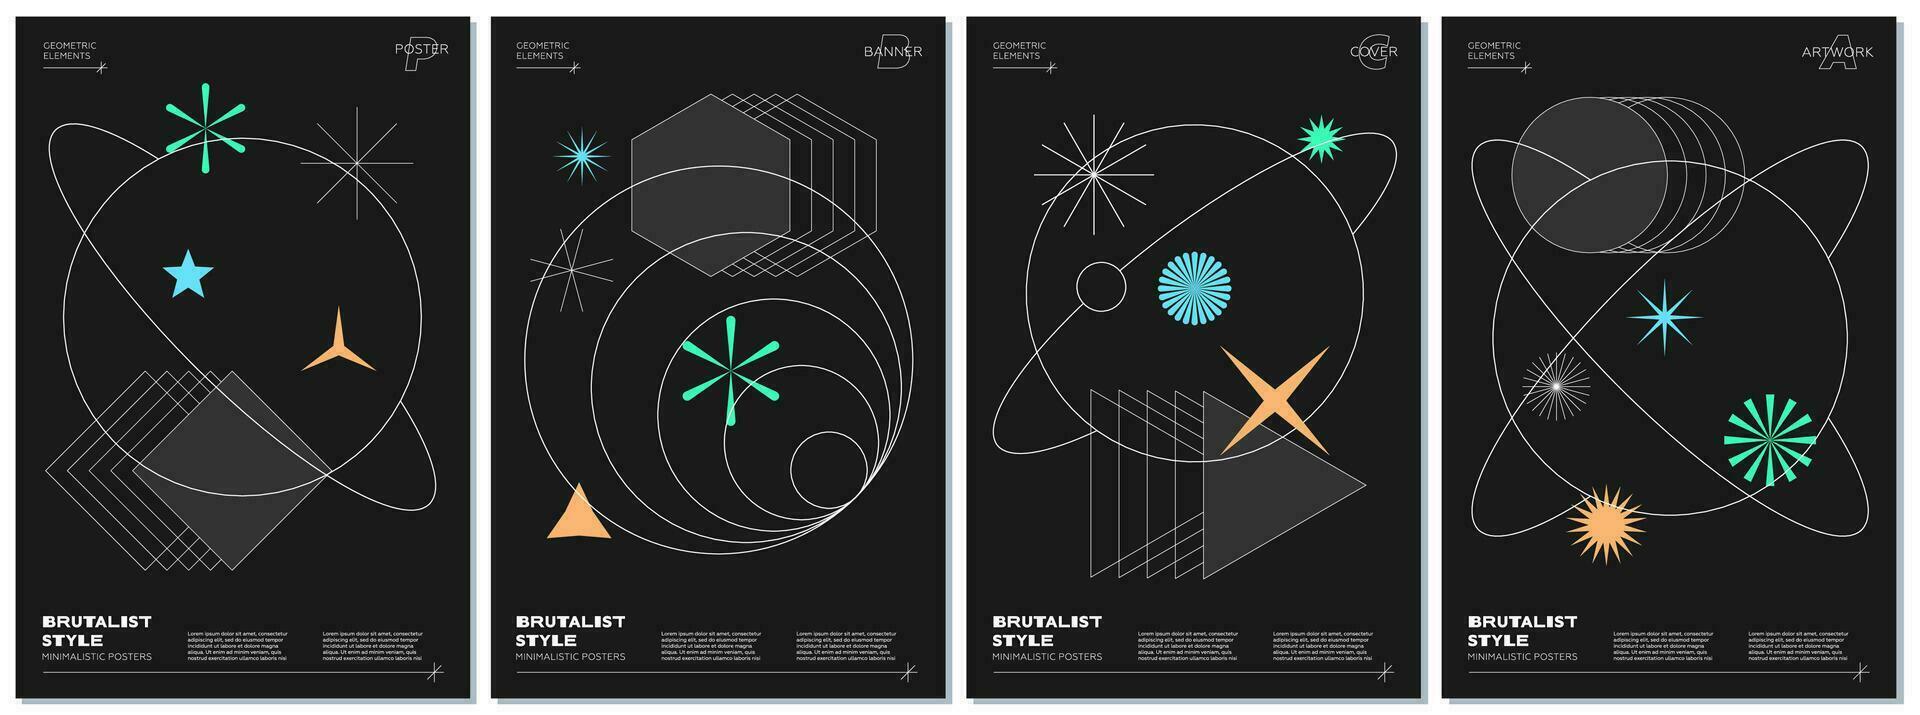 Abstract brutalism poster set with geometric linear planets and memphis shapes on black space background. Modern brutalist style minimal simple graphic prints. Brutal trendy y2k design vector design